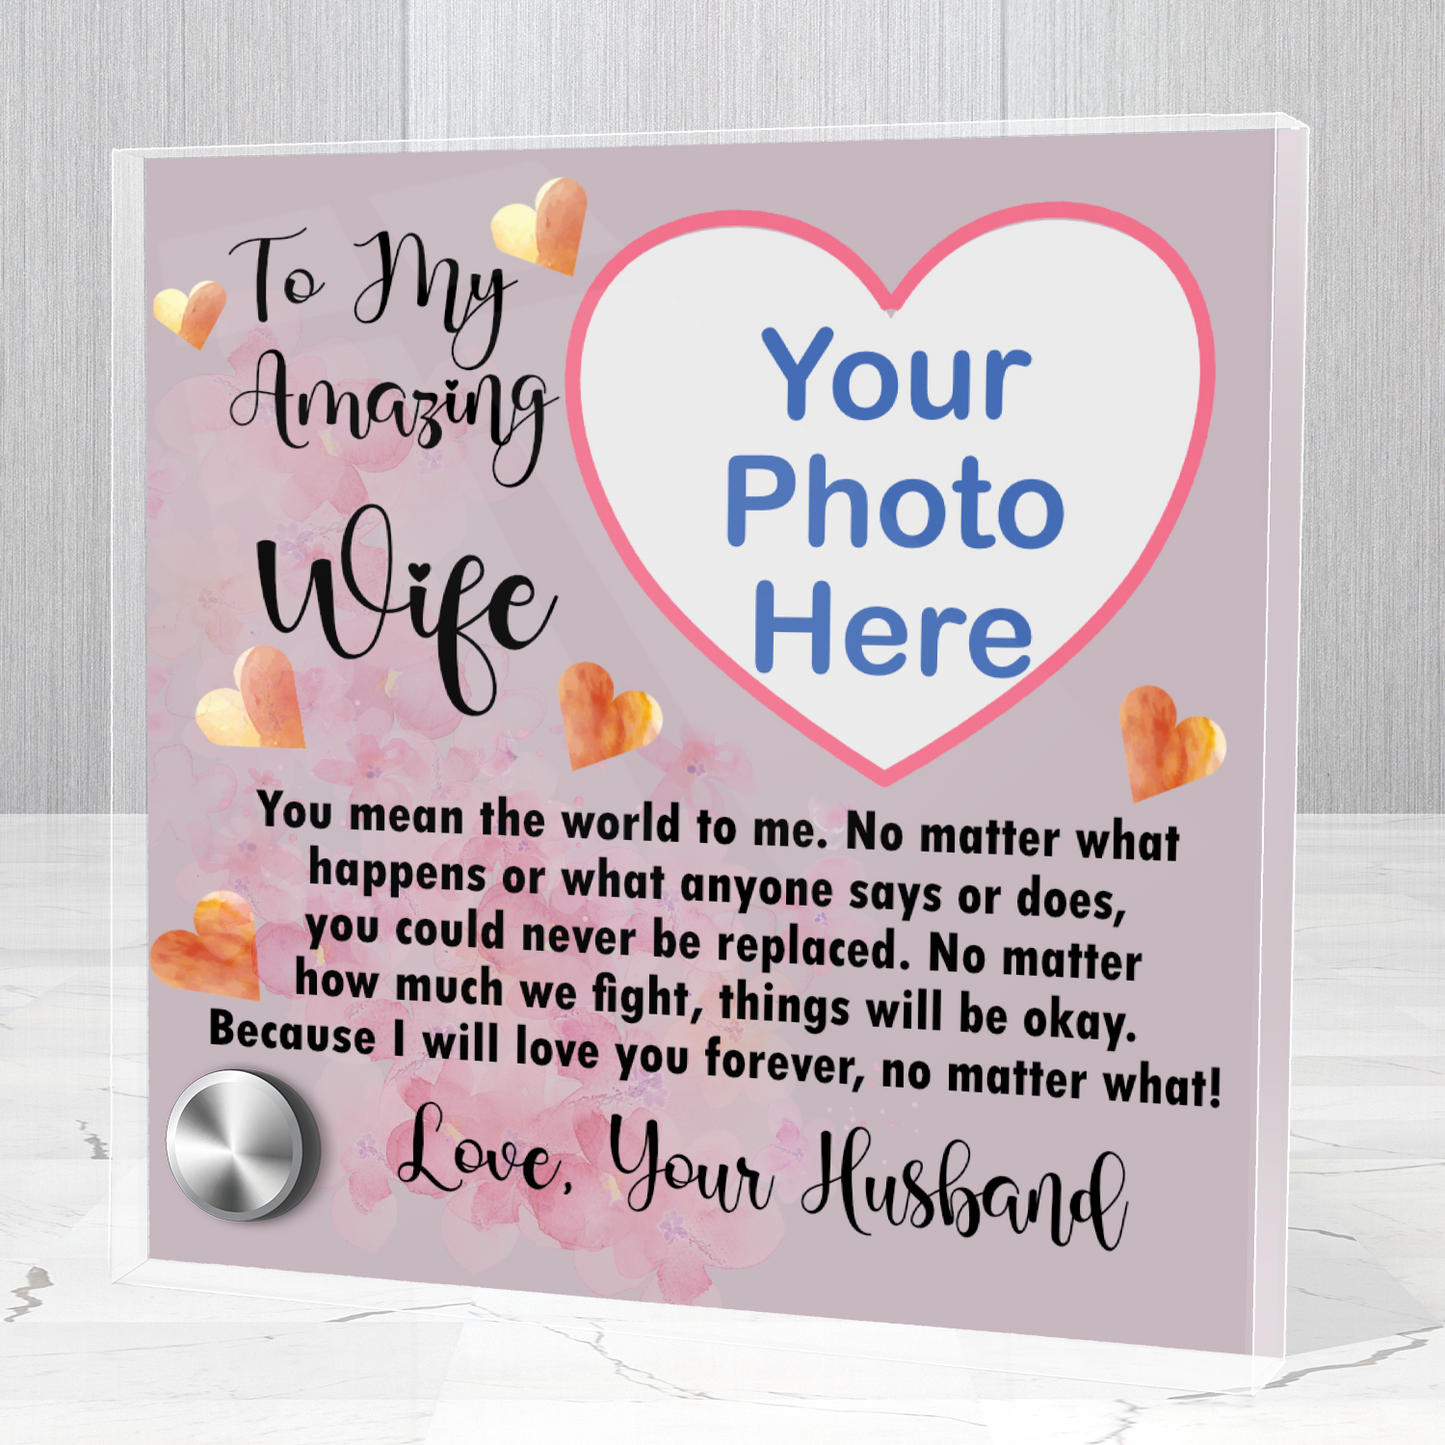 To My Amazing Wife Photo Upload Lumen Glass Message Card Display Stand With Jewelry, Personalized Gift For Wife